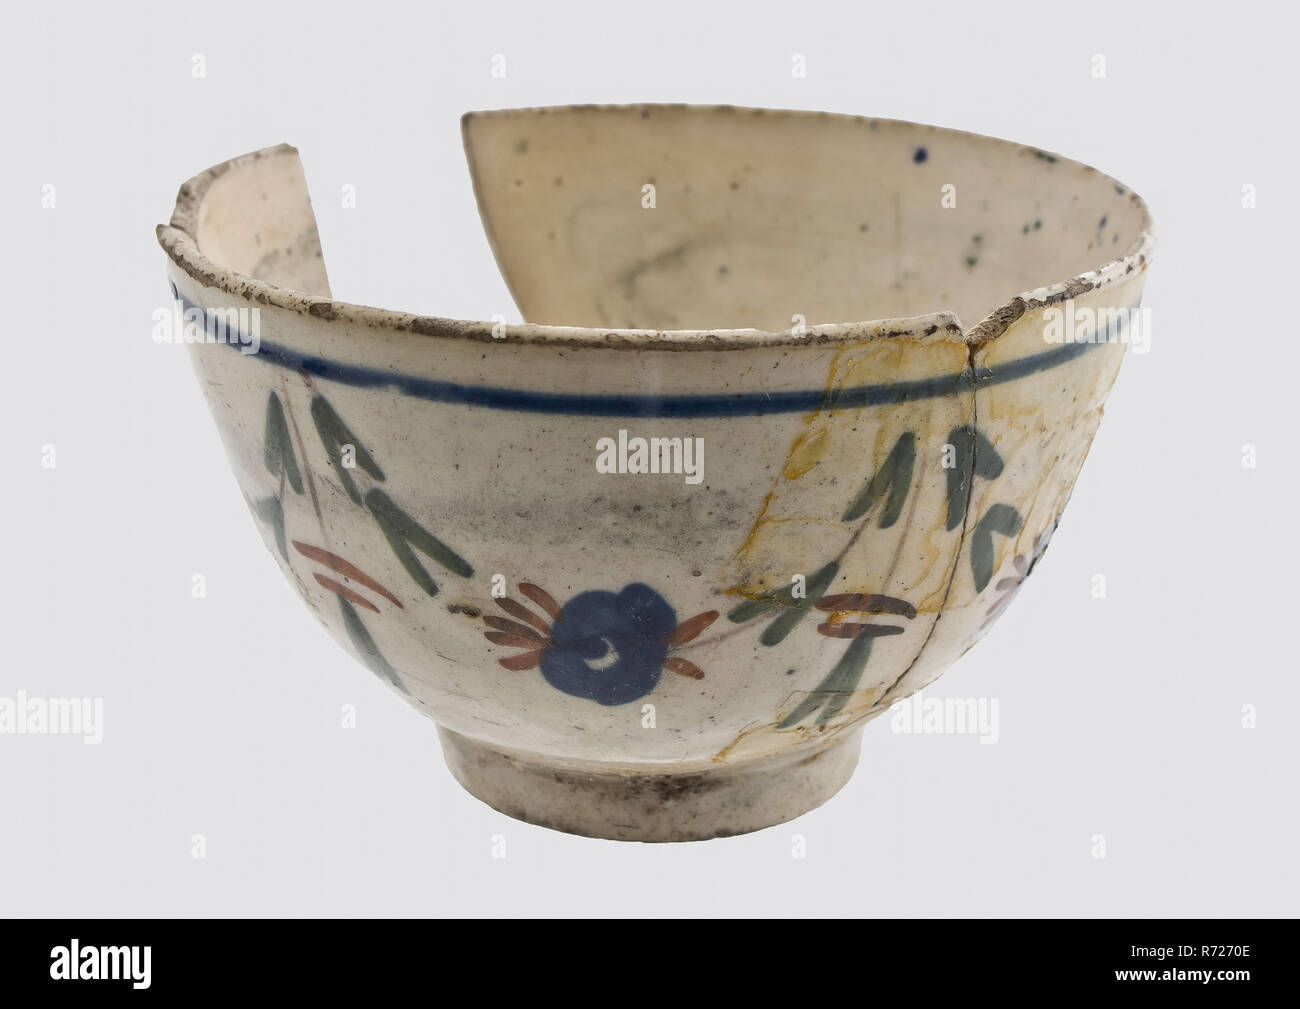 Tea bowl with simple colored flower garlands on the outside wall, bowl crockery holder soil find ceramic porcelain glaze, in form made hand-painted glazed fried Small bowl on stand. White earthenware or industrial white Decoration applied by hand Polychrome consisting of flower garlands in the colors green red manganese and blue Highly discolored by staying in the soil archeology Valckensteyn Poortugaal Albrandswaard indigenous pottery drinking tea drinking tea serving Soil discovery Poortugaal Castle Valckensteyn. Stock Photo